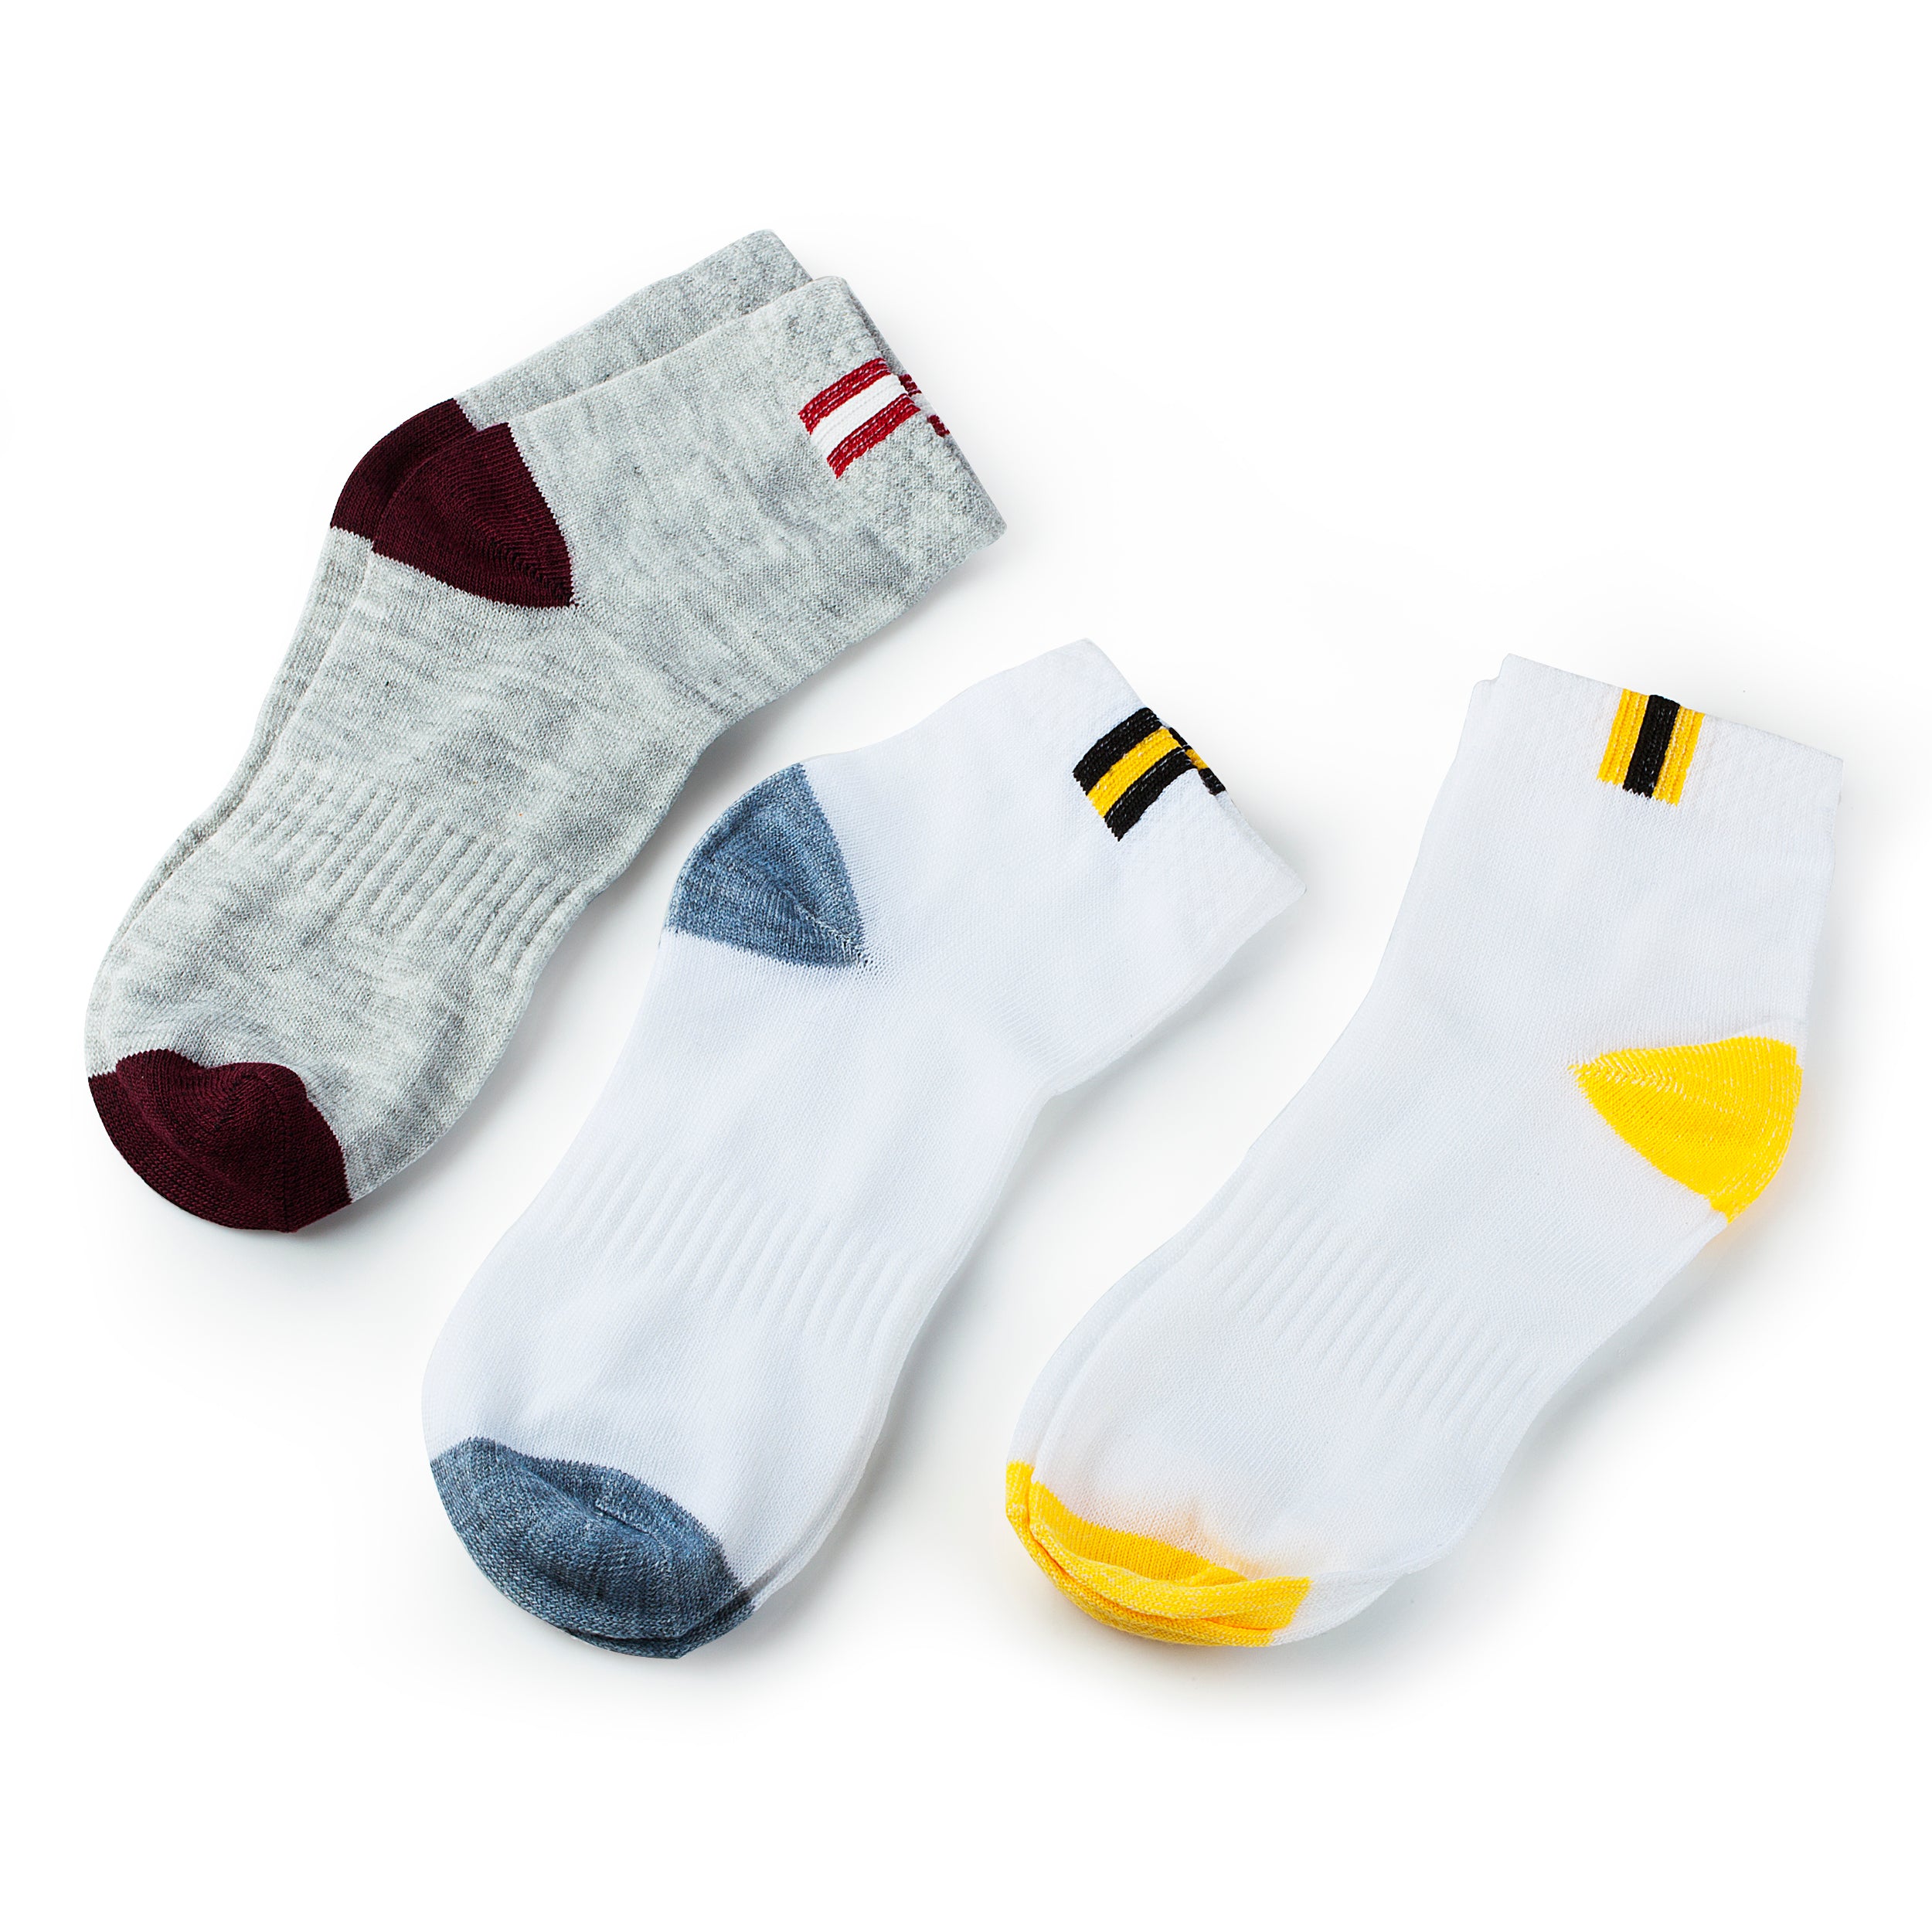 Socks - Kid's Size 4-8 Multi-Pack Polyester/Cotton Socks (10 Pairs) (Available In April!)